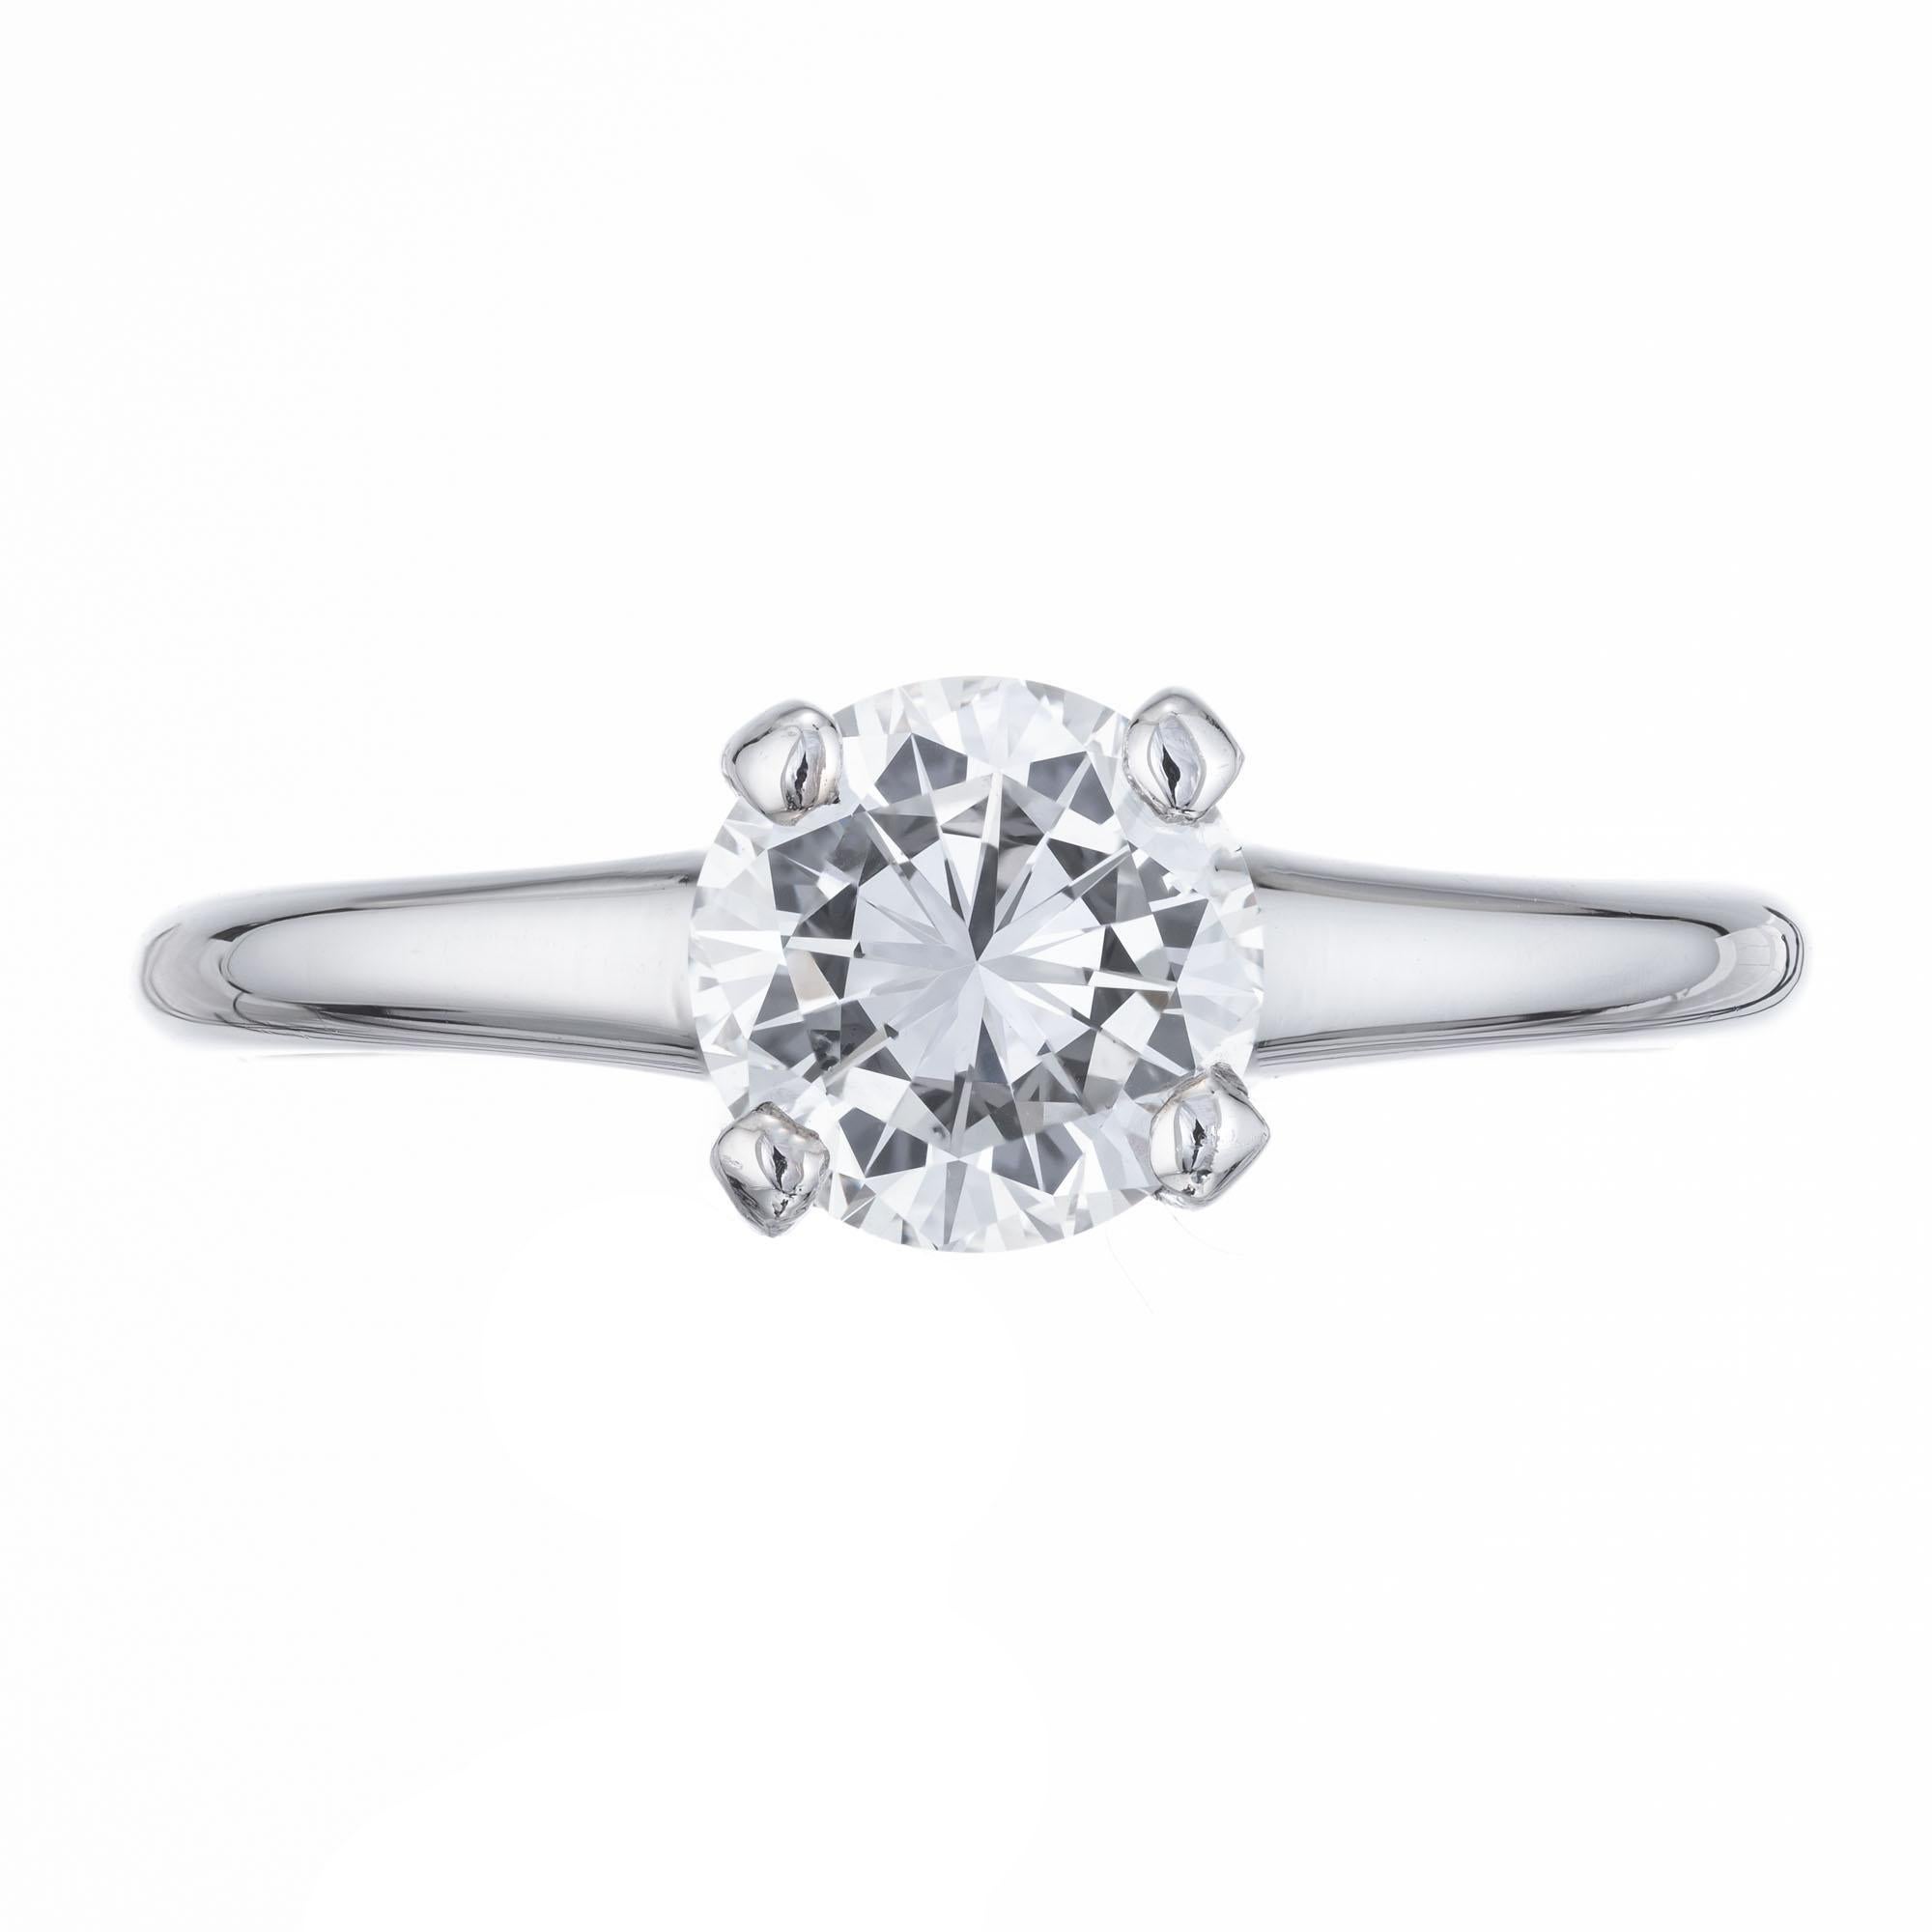 European transitional cut diamond engagement ring. GIA certified center stone in a 4 prong platinum solitaire setting. 

1 round diamond E VS2, approx. .91cts GIA Certificate # 5172036979
Size: 5.75 and sizable. 
Platinum 
Stamped: 10% irid